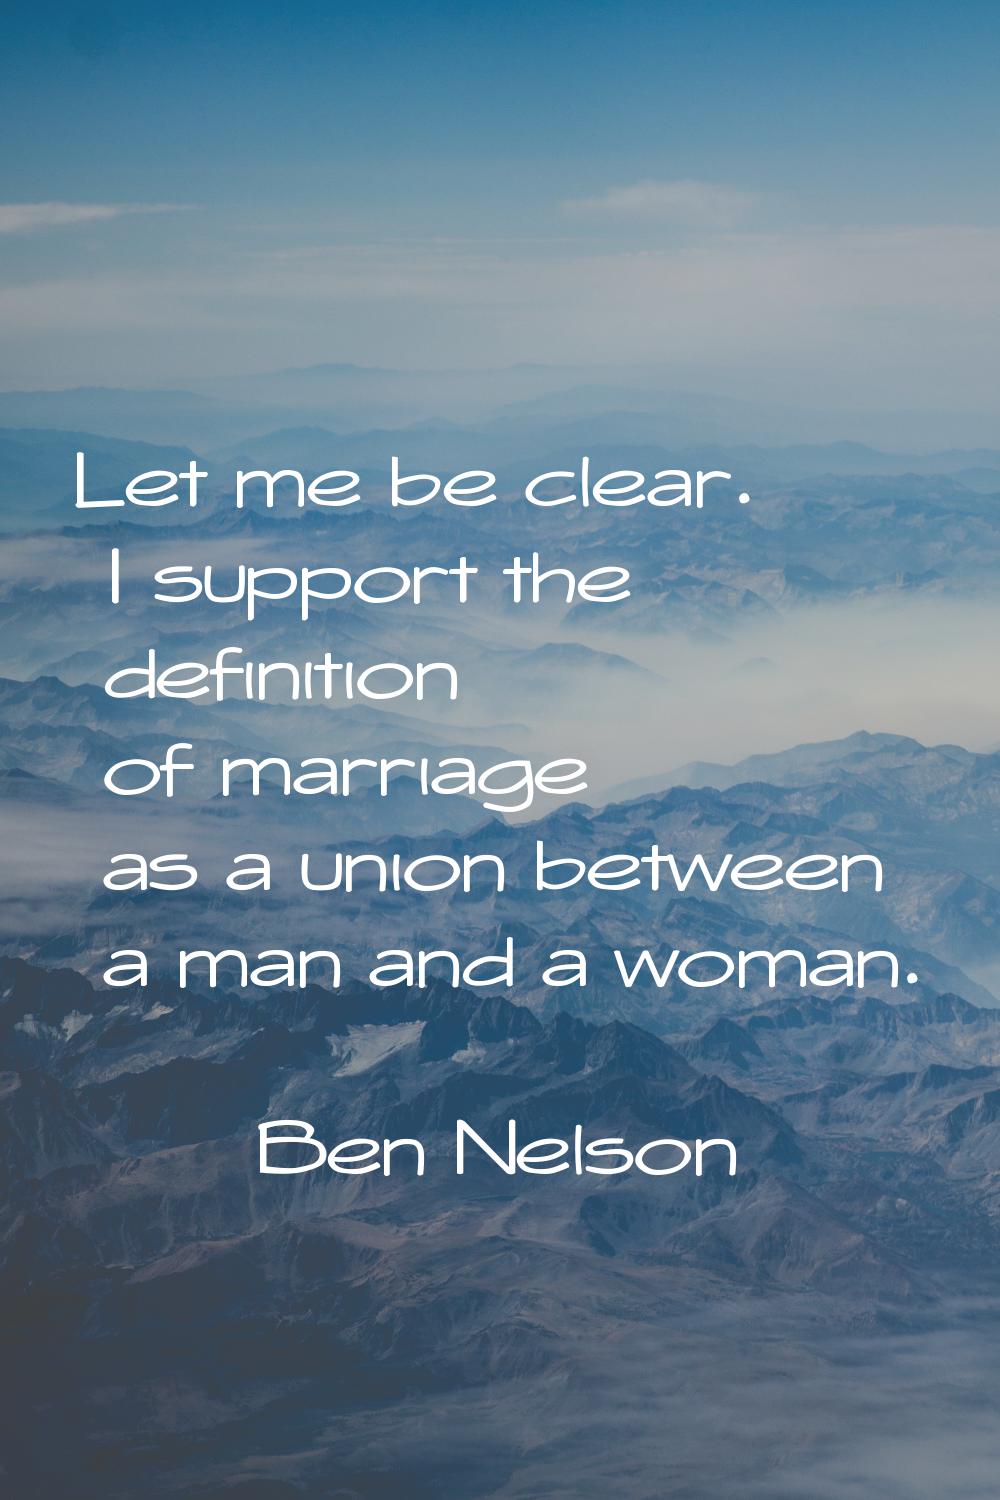 Let me be clear. I support the definition of marriage as a union between a man and a woman.